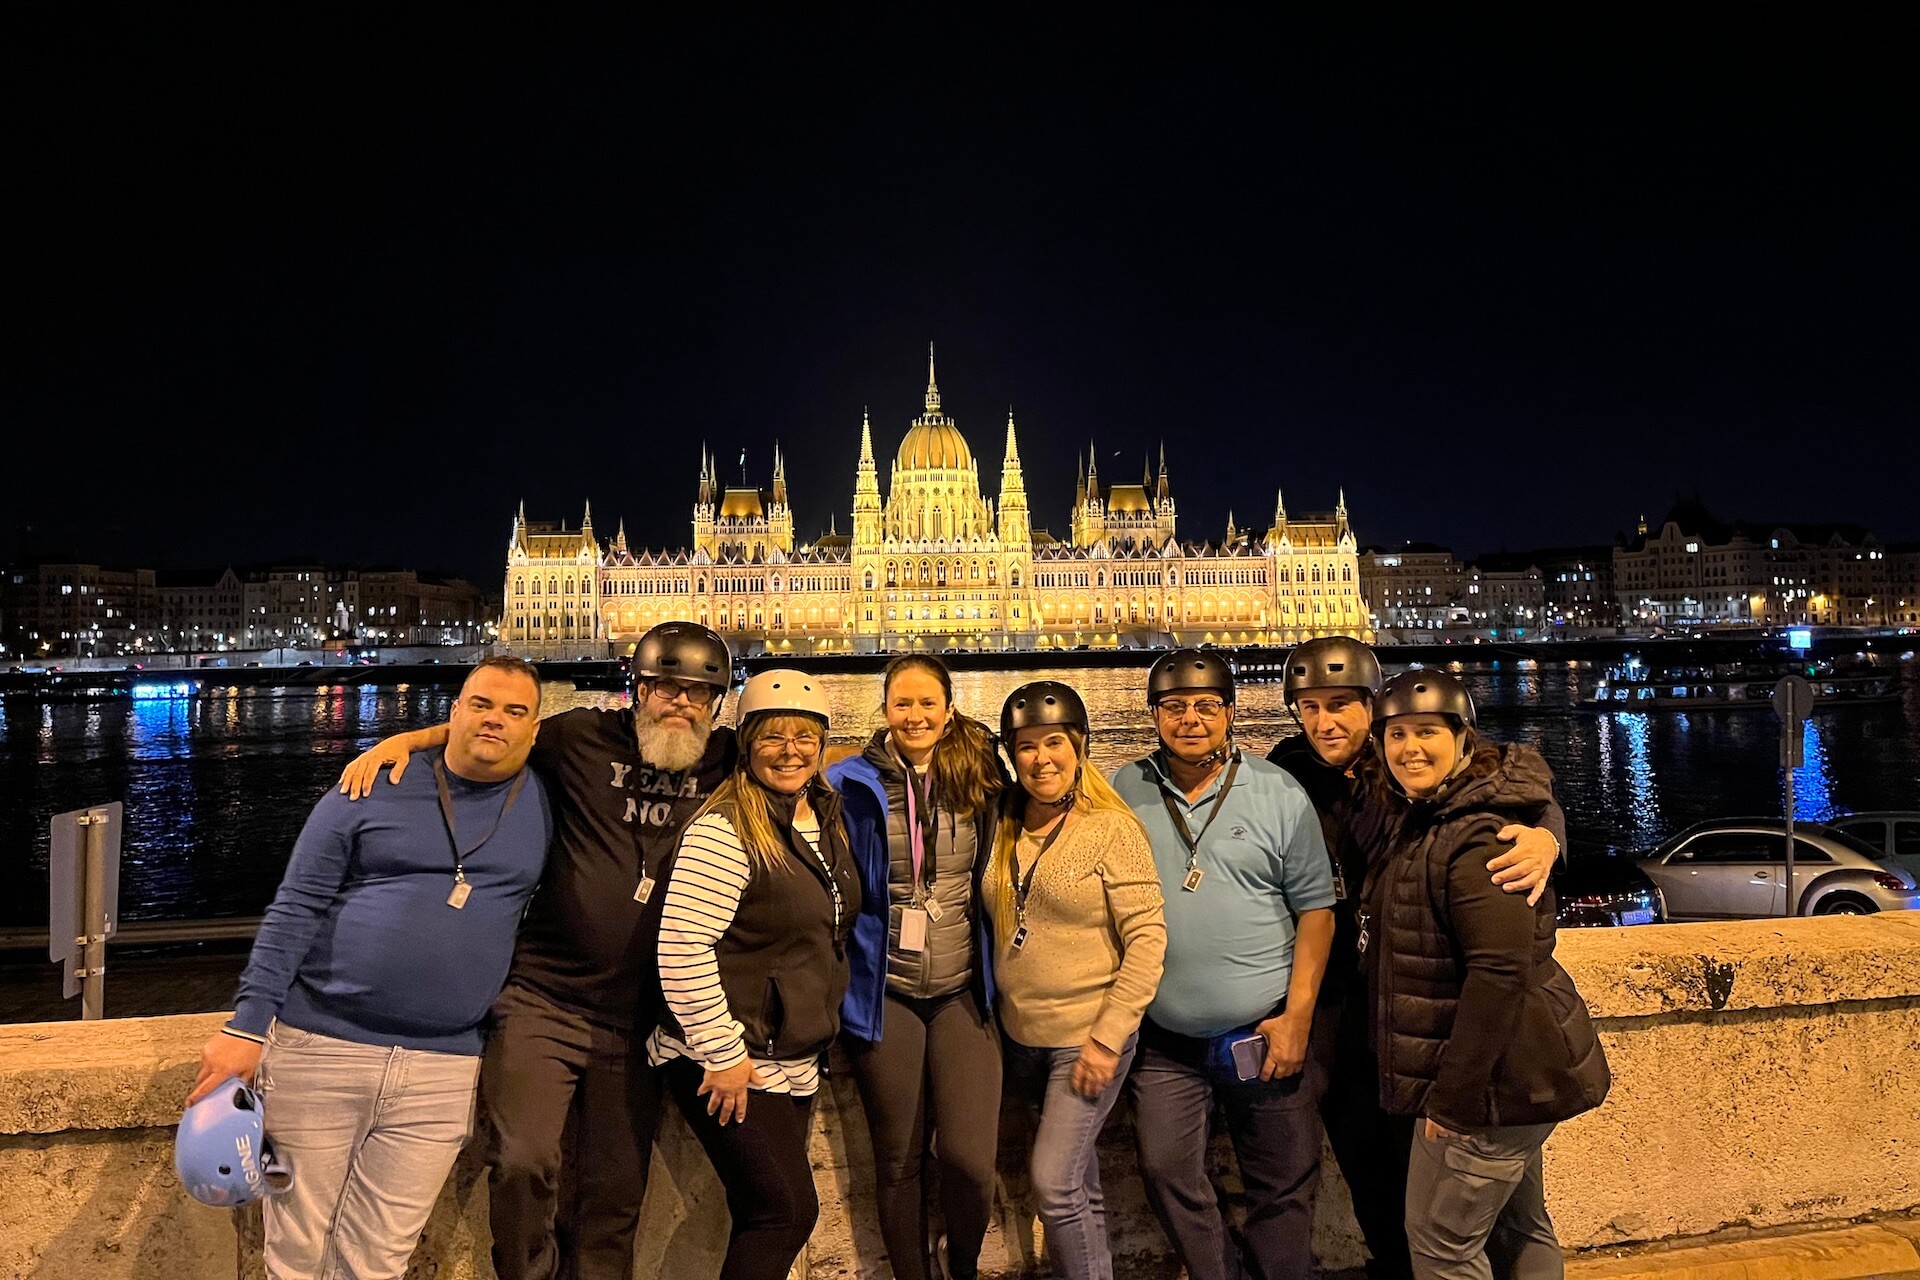 A group of people on the Night Tour with the Parliament in the background